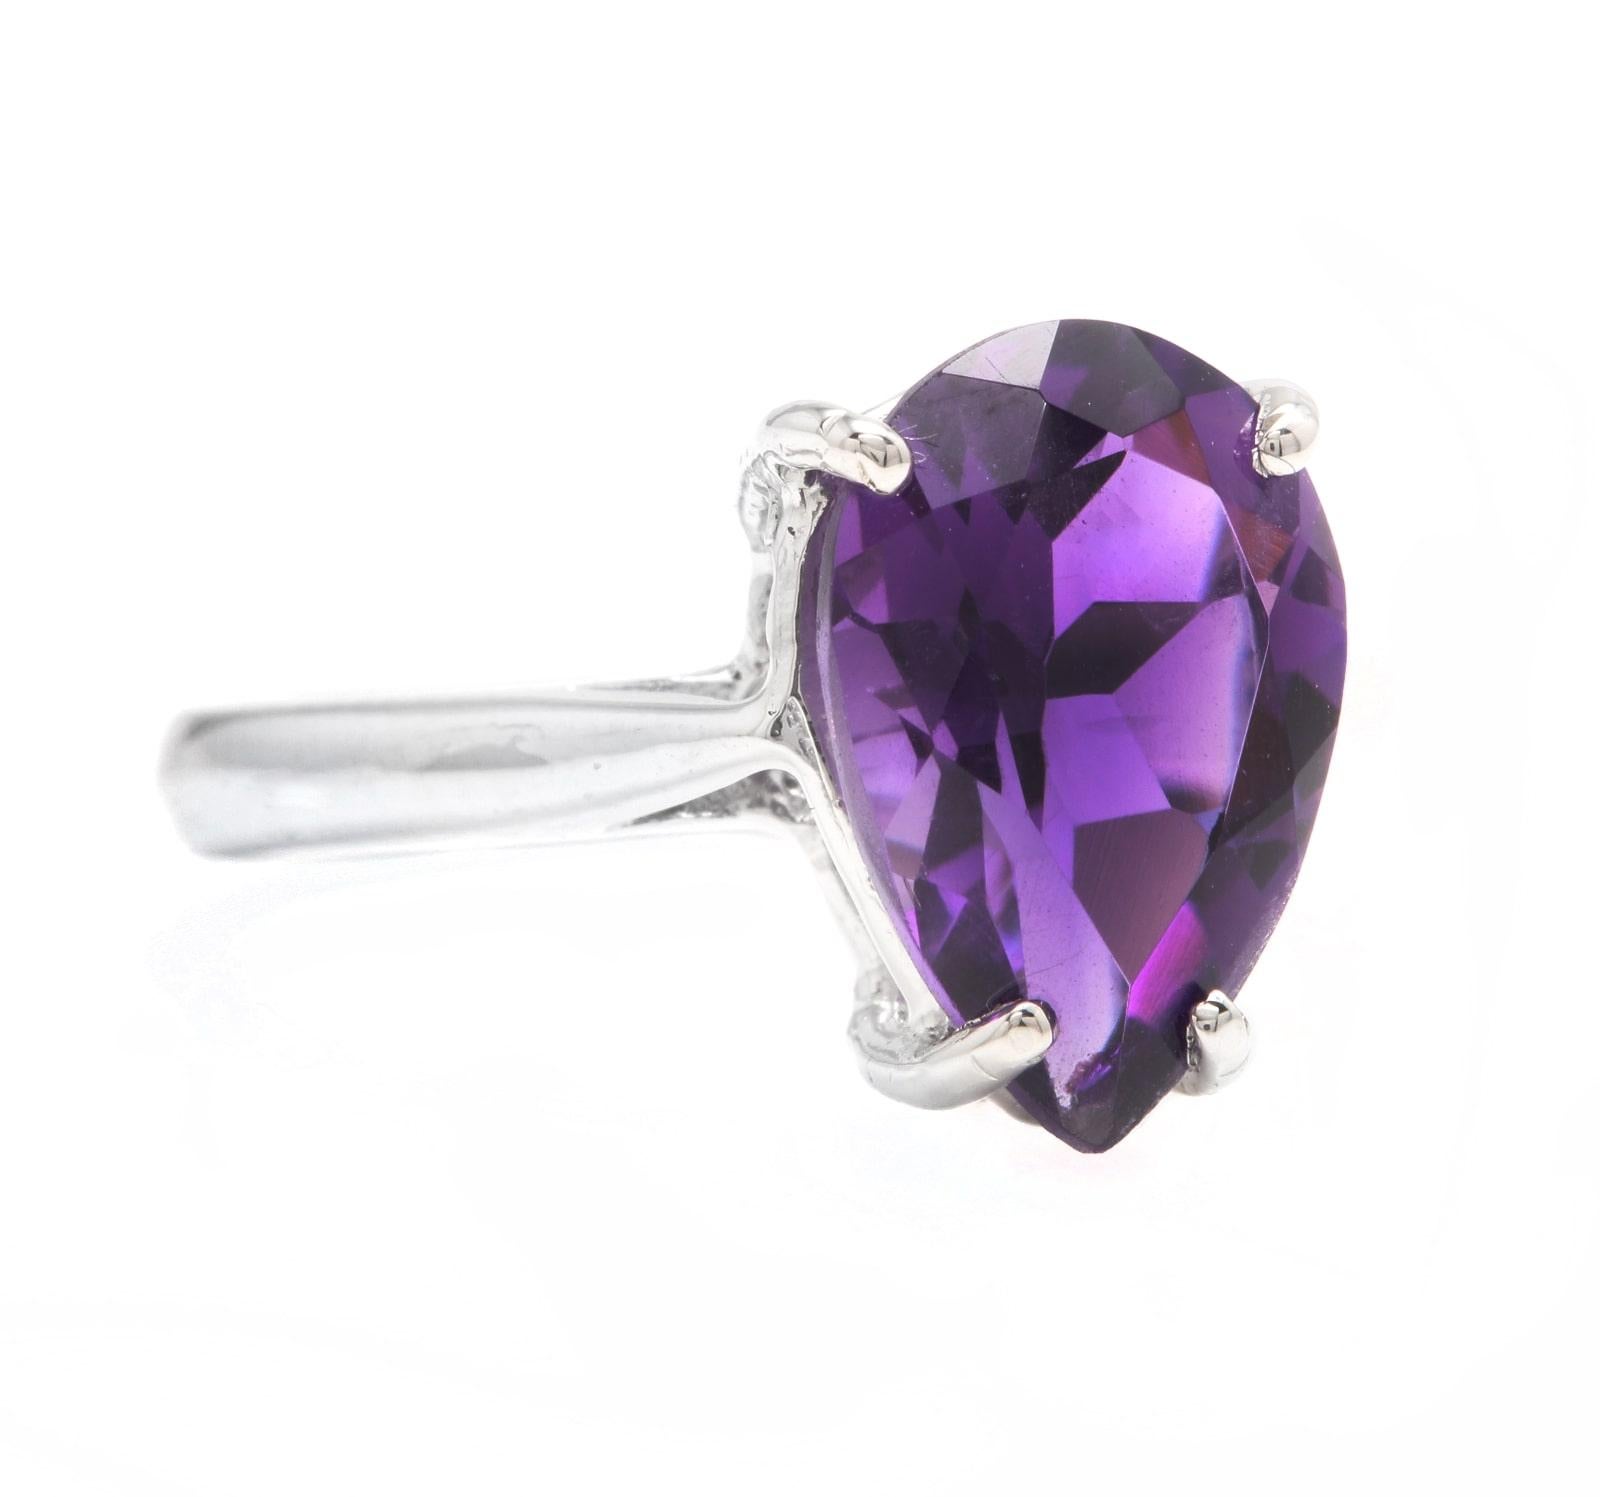 4.10 Carats Exquisite Natural Amethyst 14K Solid White Gold Ring

Total Natural Amethyst Weight is: Approx. 4.10 Carats 

Amethyst Measures: Approx. 12.00 x 8.00mm

Ring size: 5.5 ( Free Sizing available)

Ring total weight: Approx. 3.1